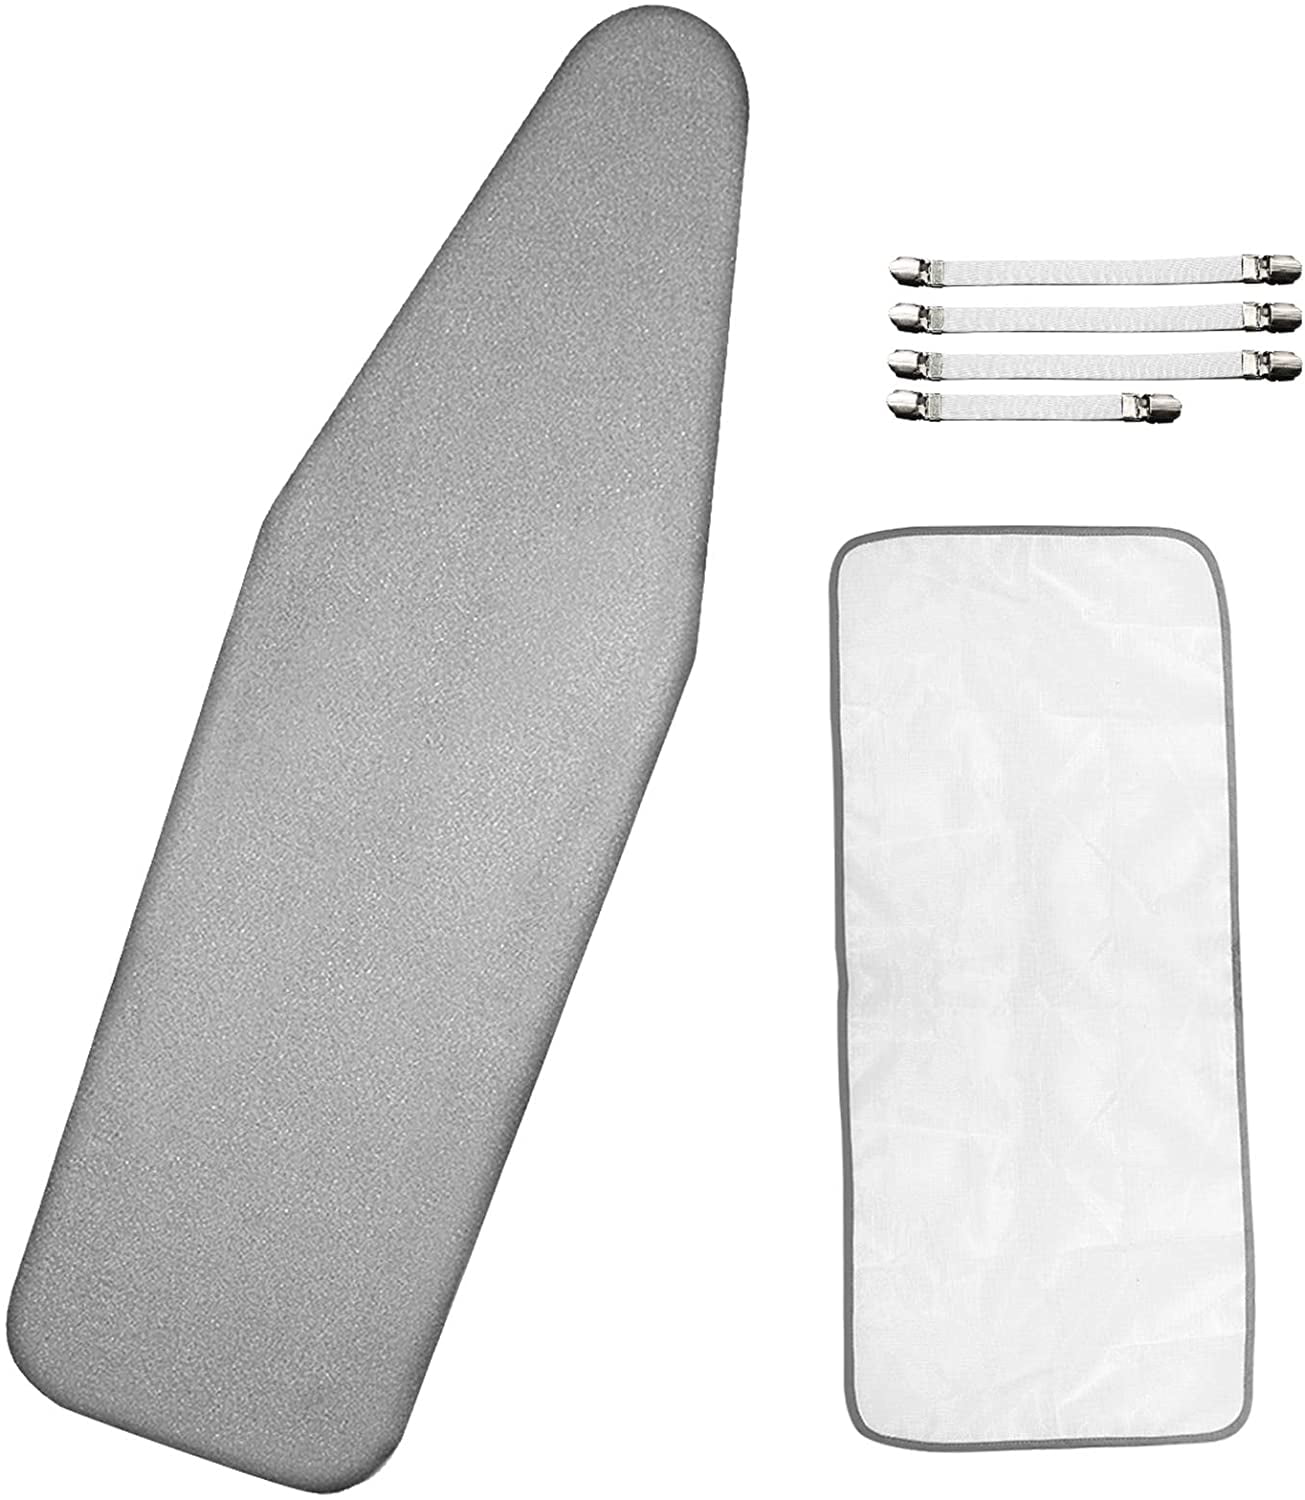 19" x 54" ironing board cover Metallic heat-reflective scorch resistant coating 